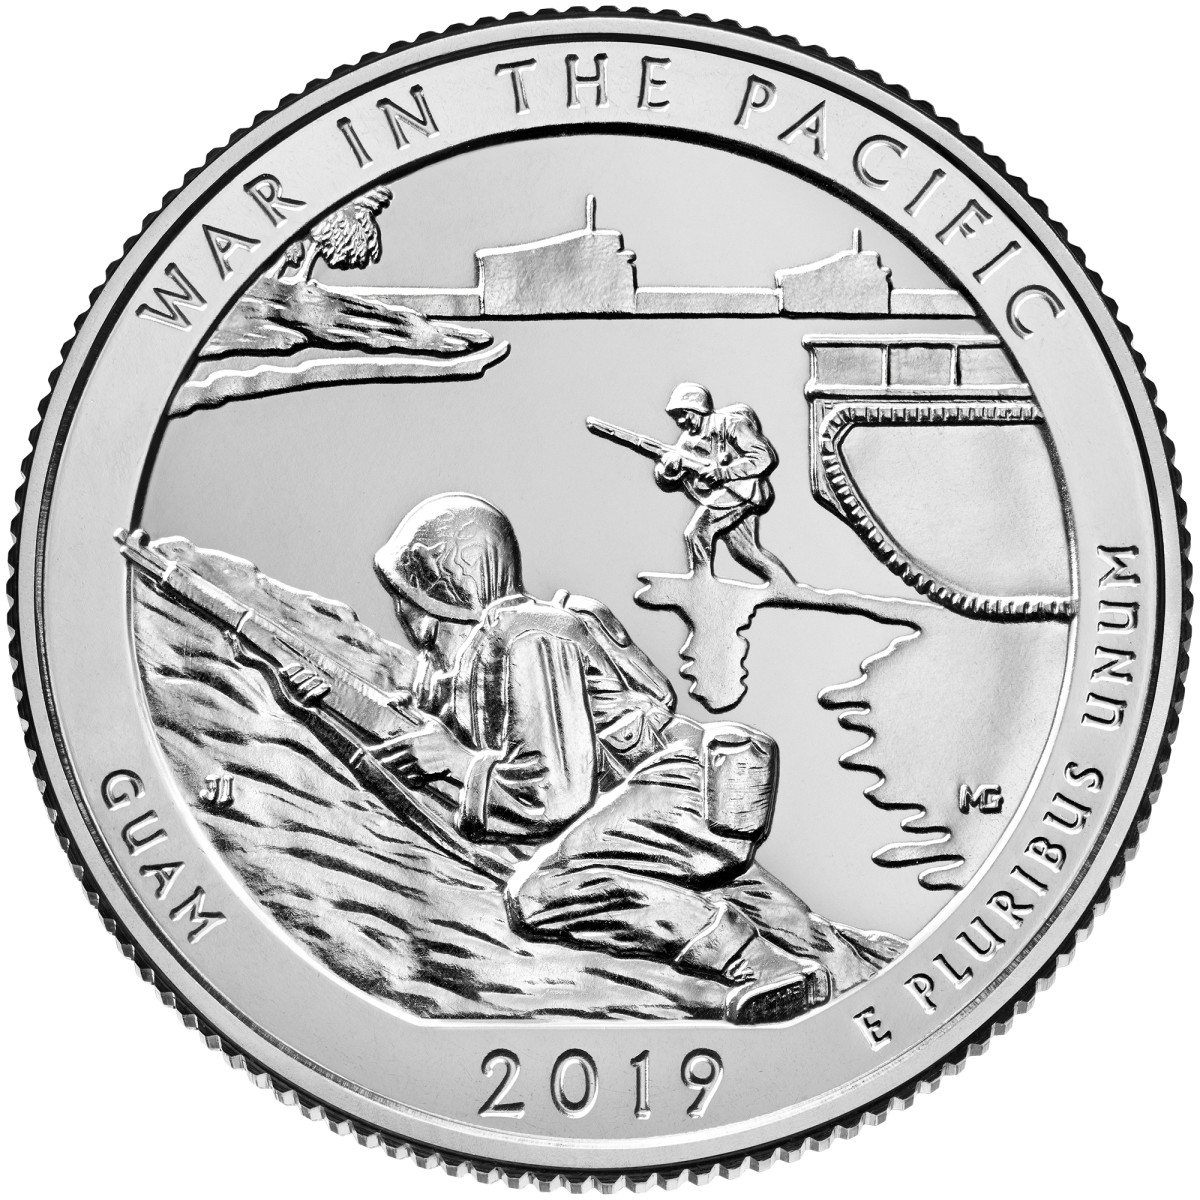 Obverse of the 2019 America the Beautiful Quarter commemorating the War in the Pacific National Historical Park. (Image courtesy of the United States Mint)